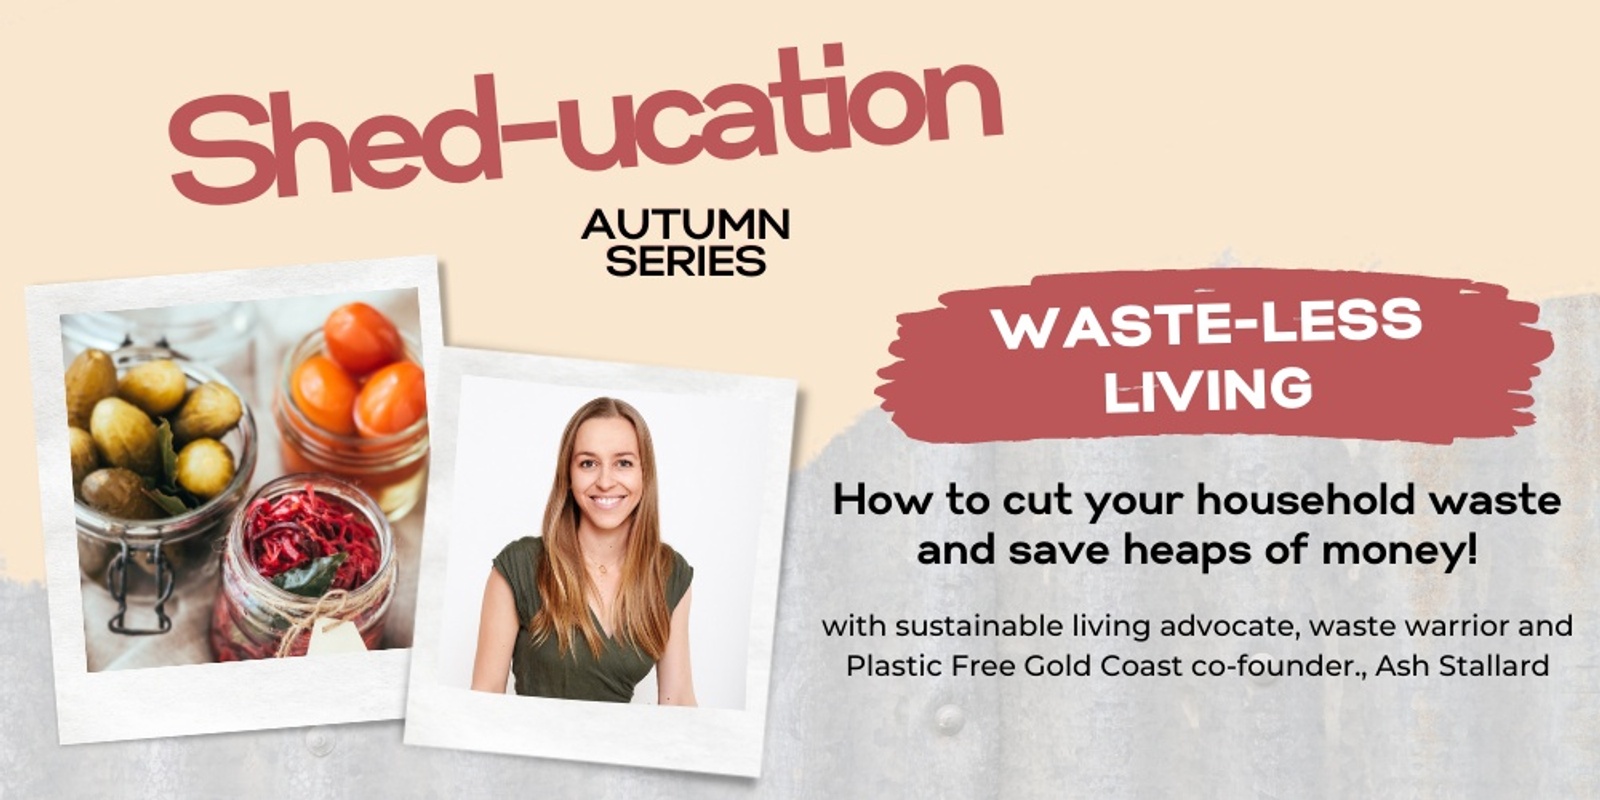 Banner image for Waste-less living - cut waste, save money | Shed-ucation Autumn Series